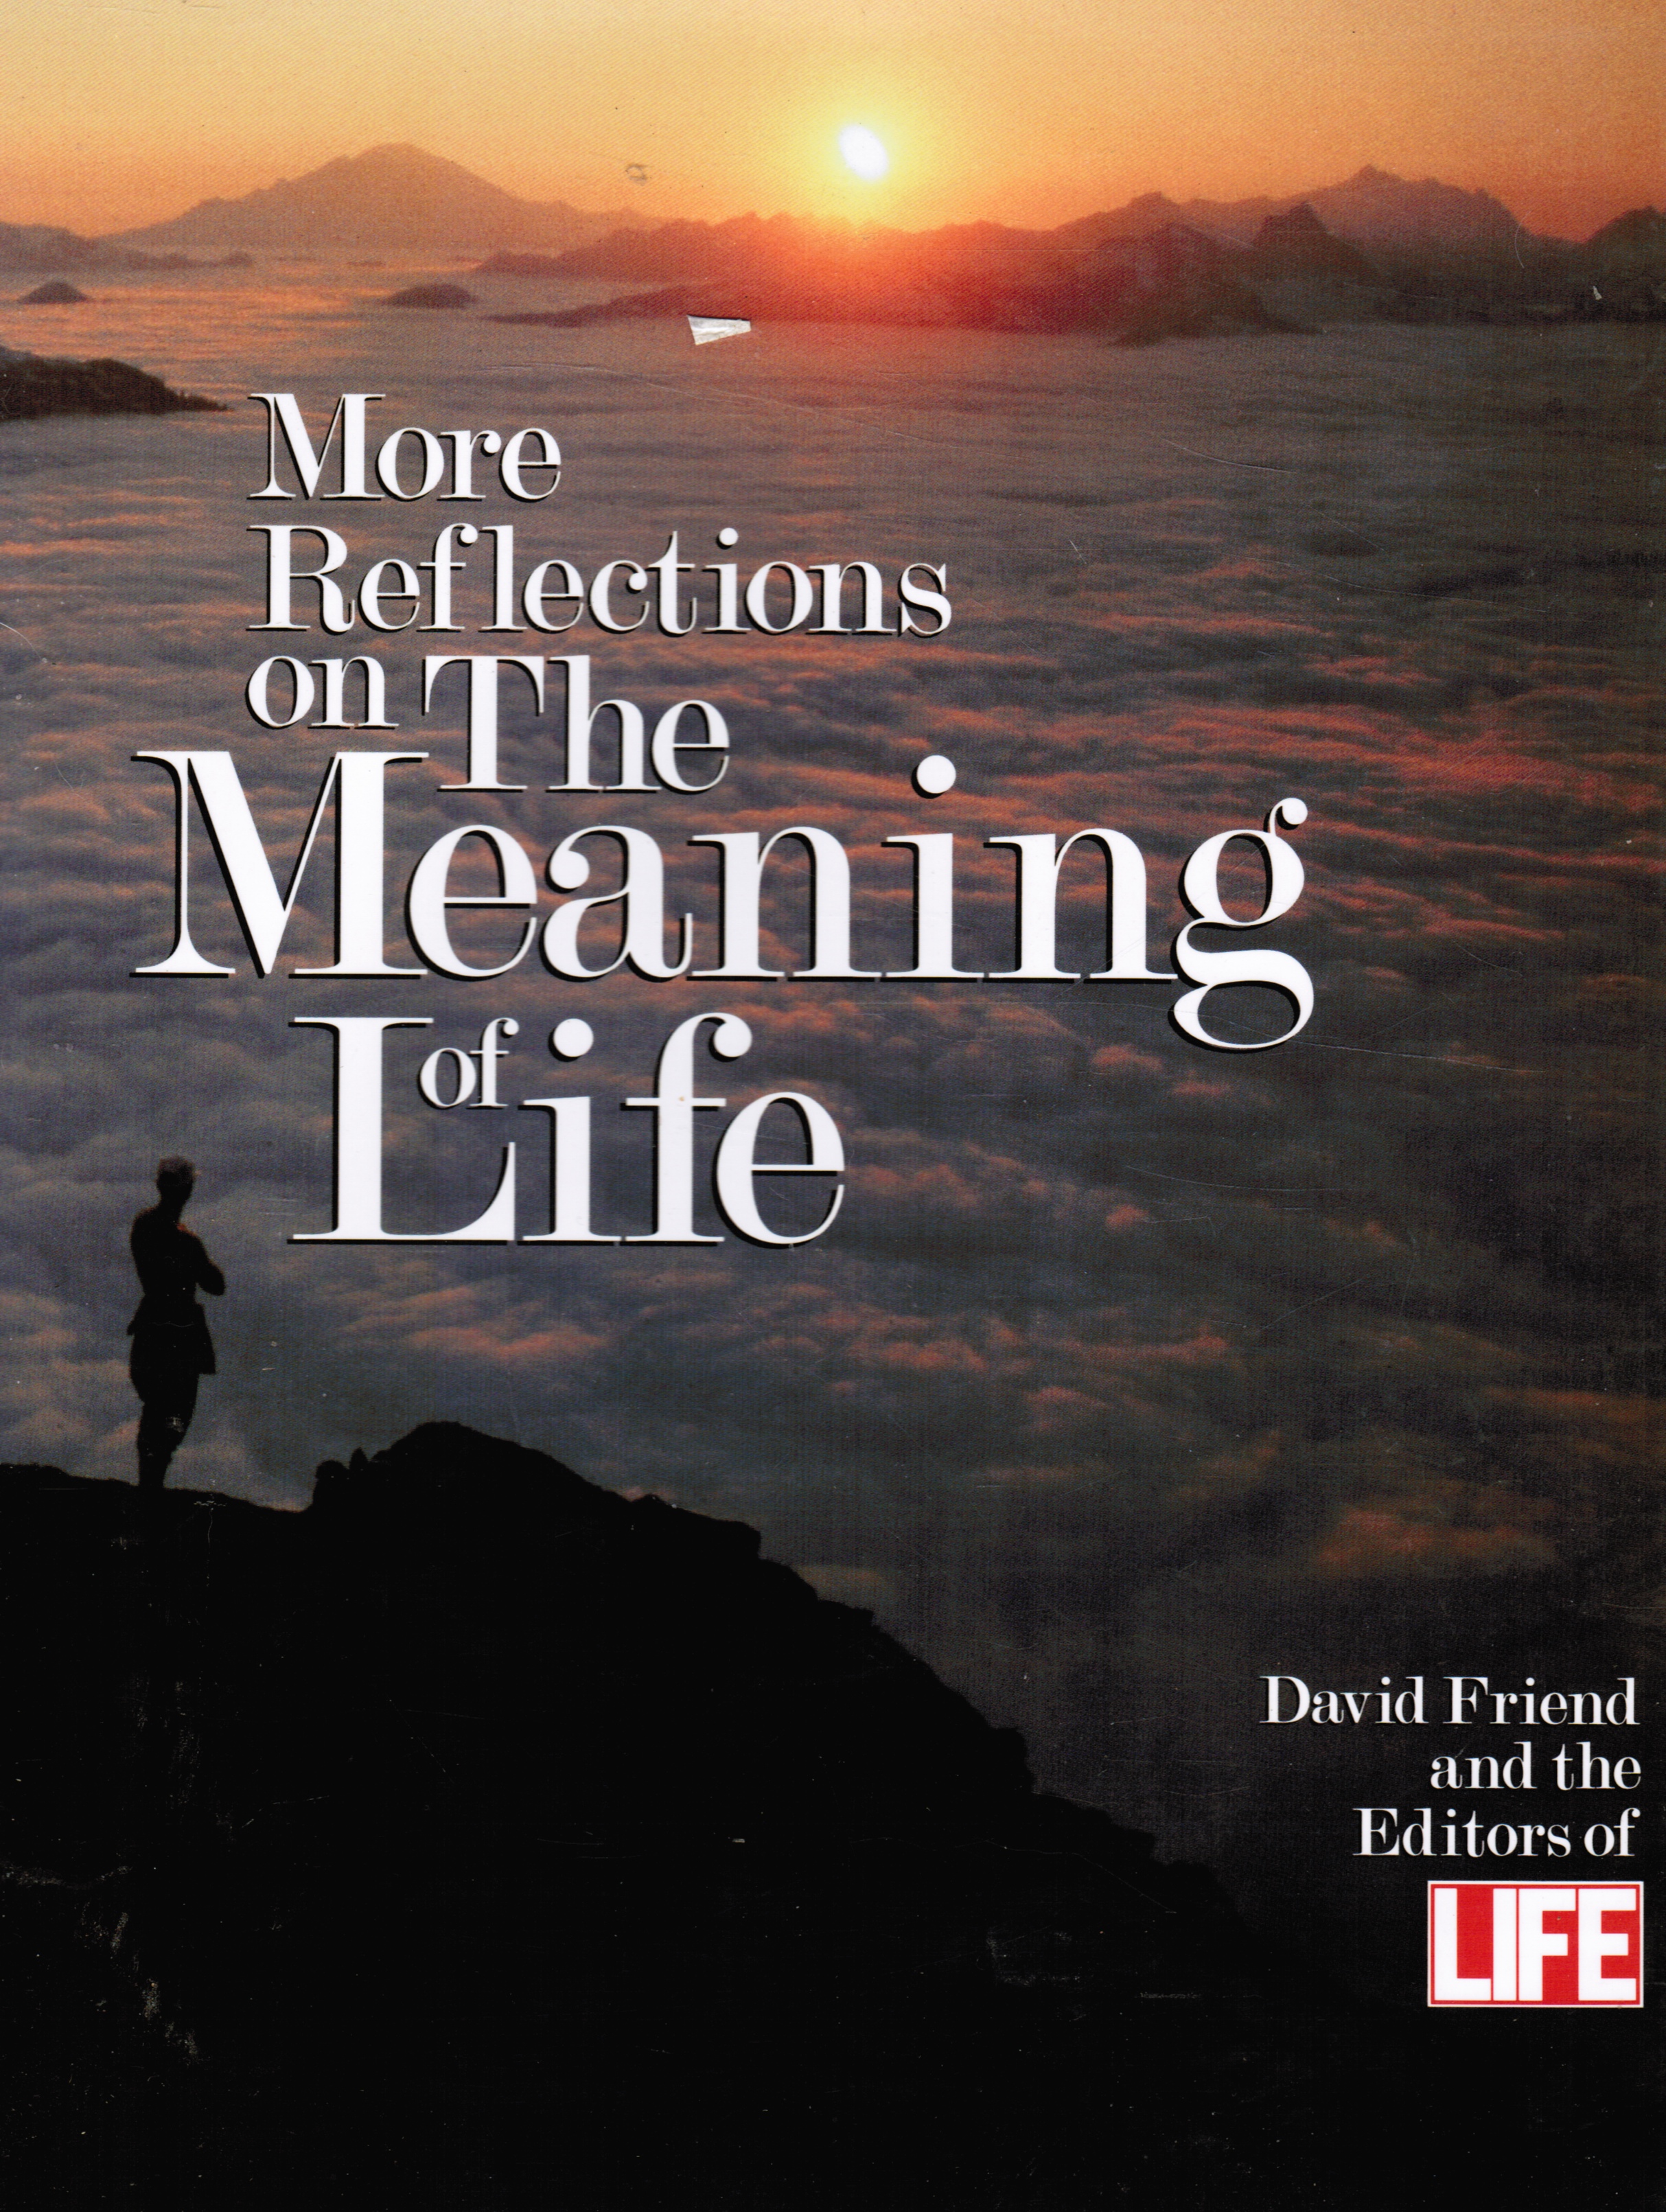 FRIEND, DAVID - More Reflections on the Meaning of Life